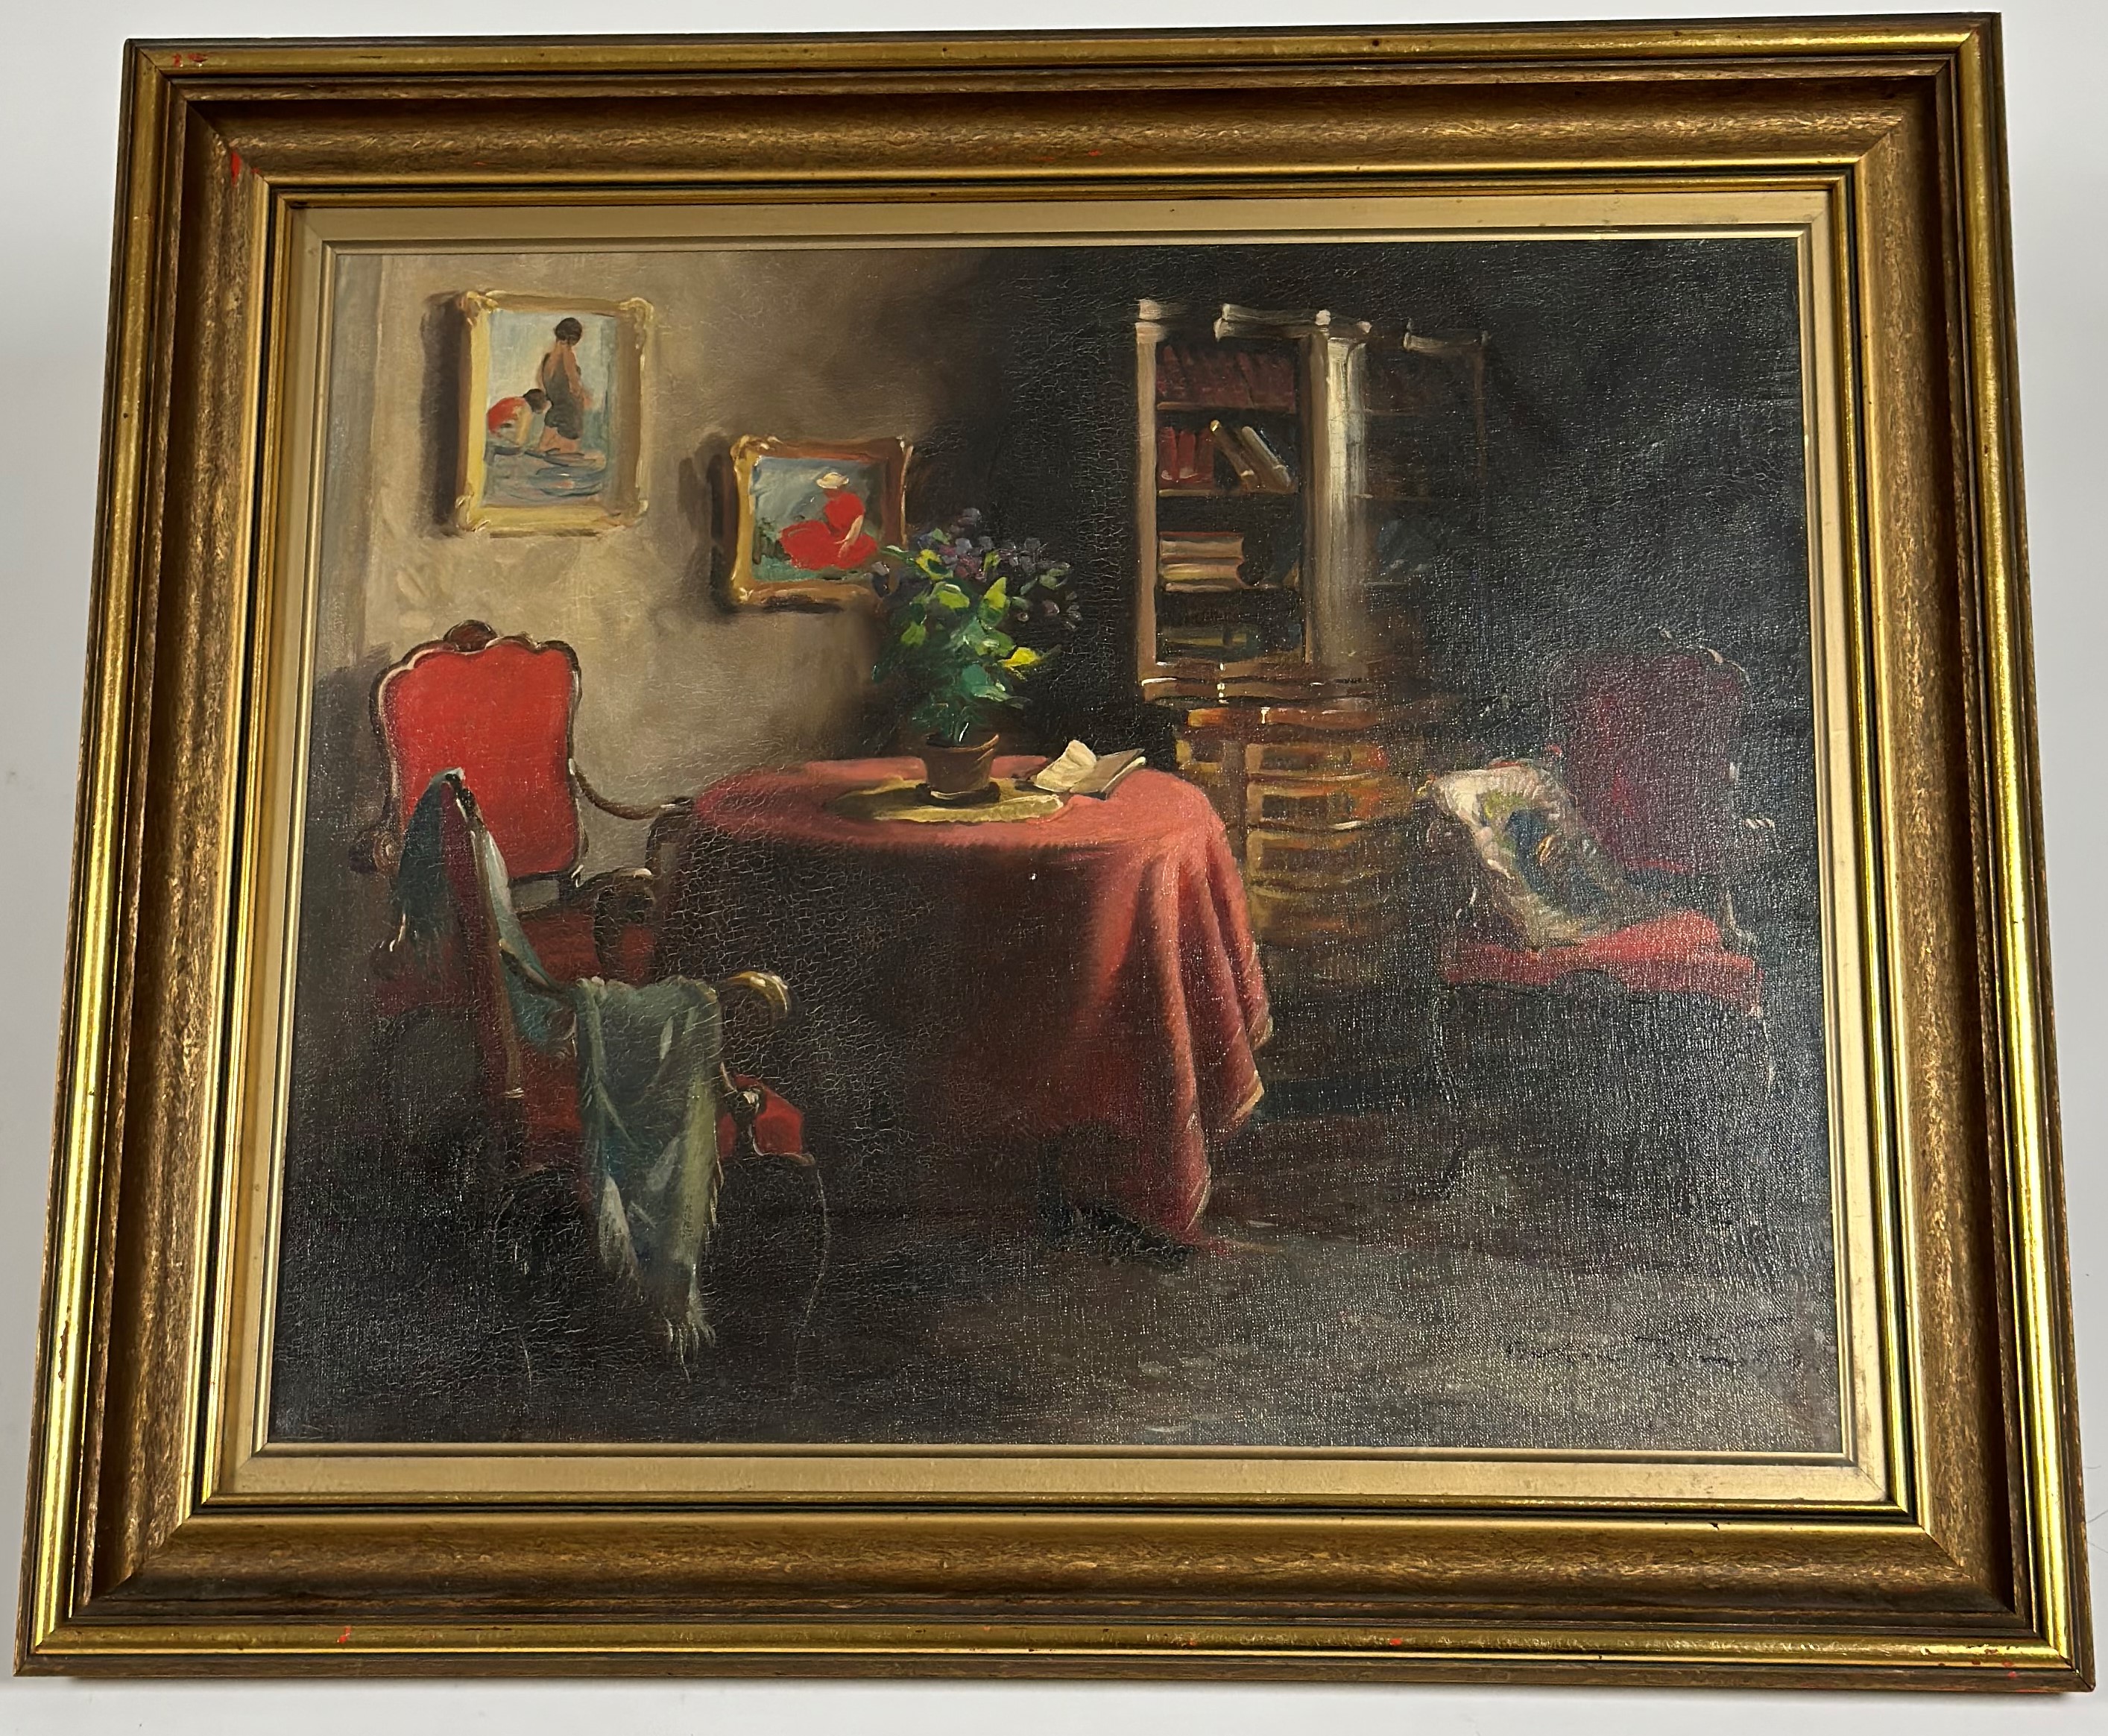 Continental School, c. 1900, The Red Chairs, signed lower right, oil on canvas, framed. 38.5cm by - Image 2 of 3